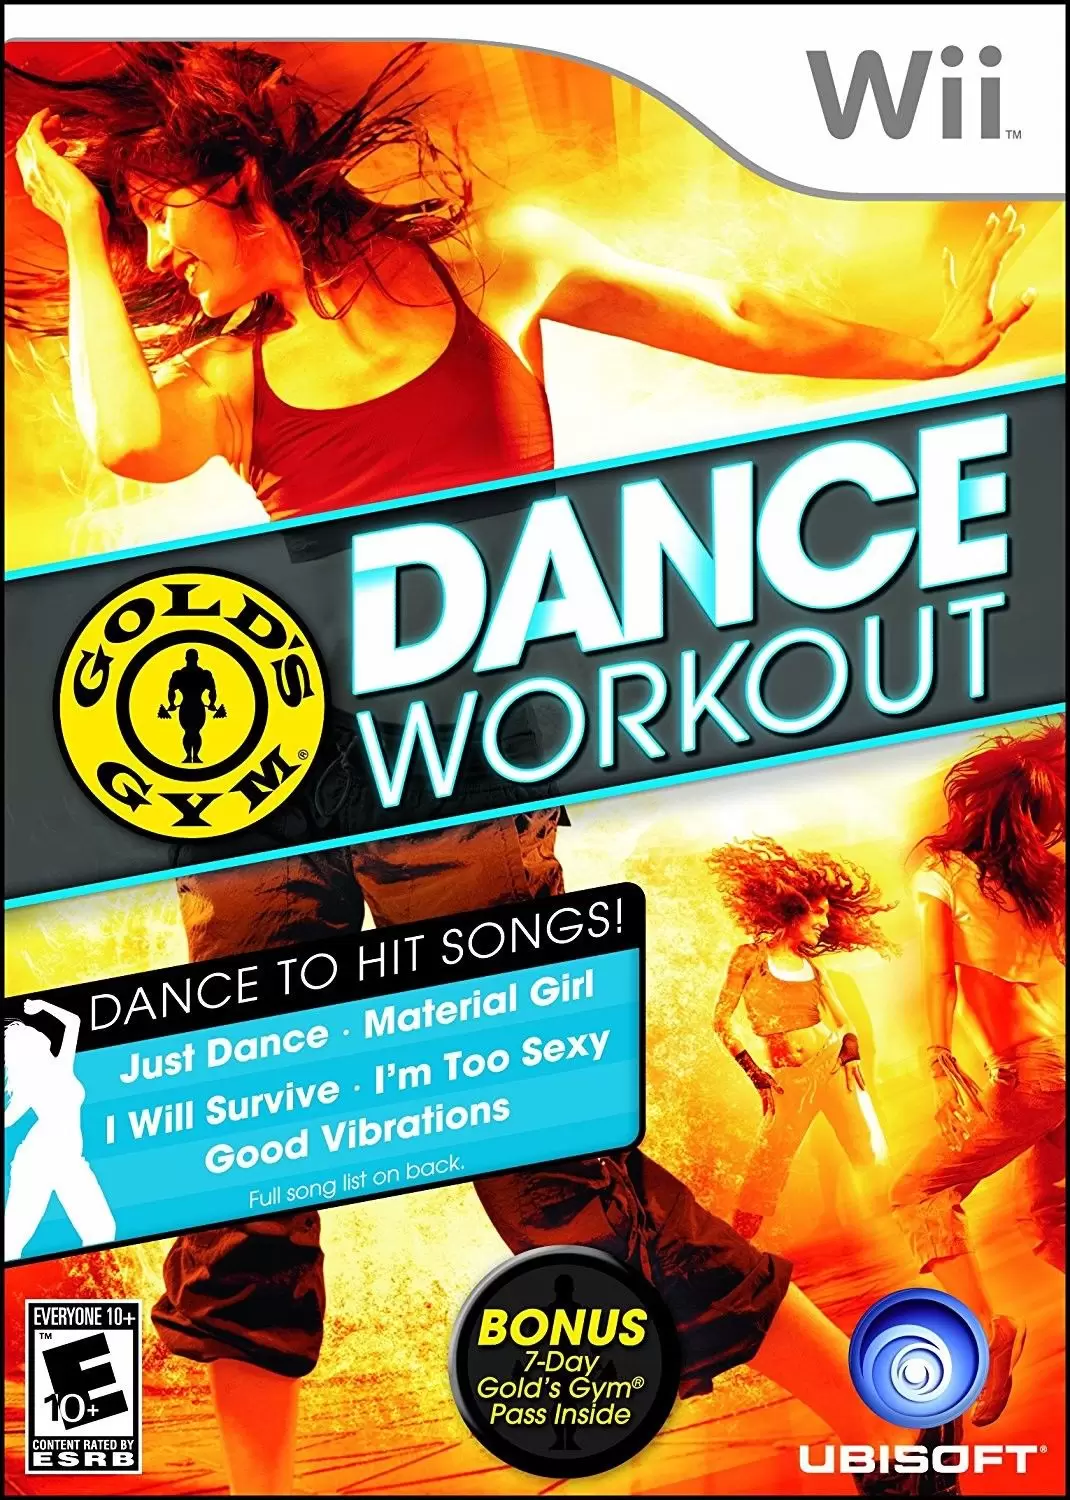 Nintendo Wii Games - Gold\'s Gym Dance Workout